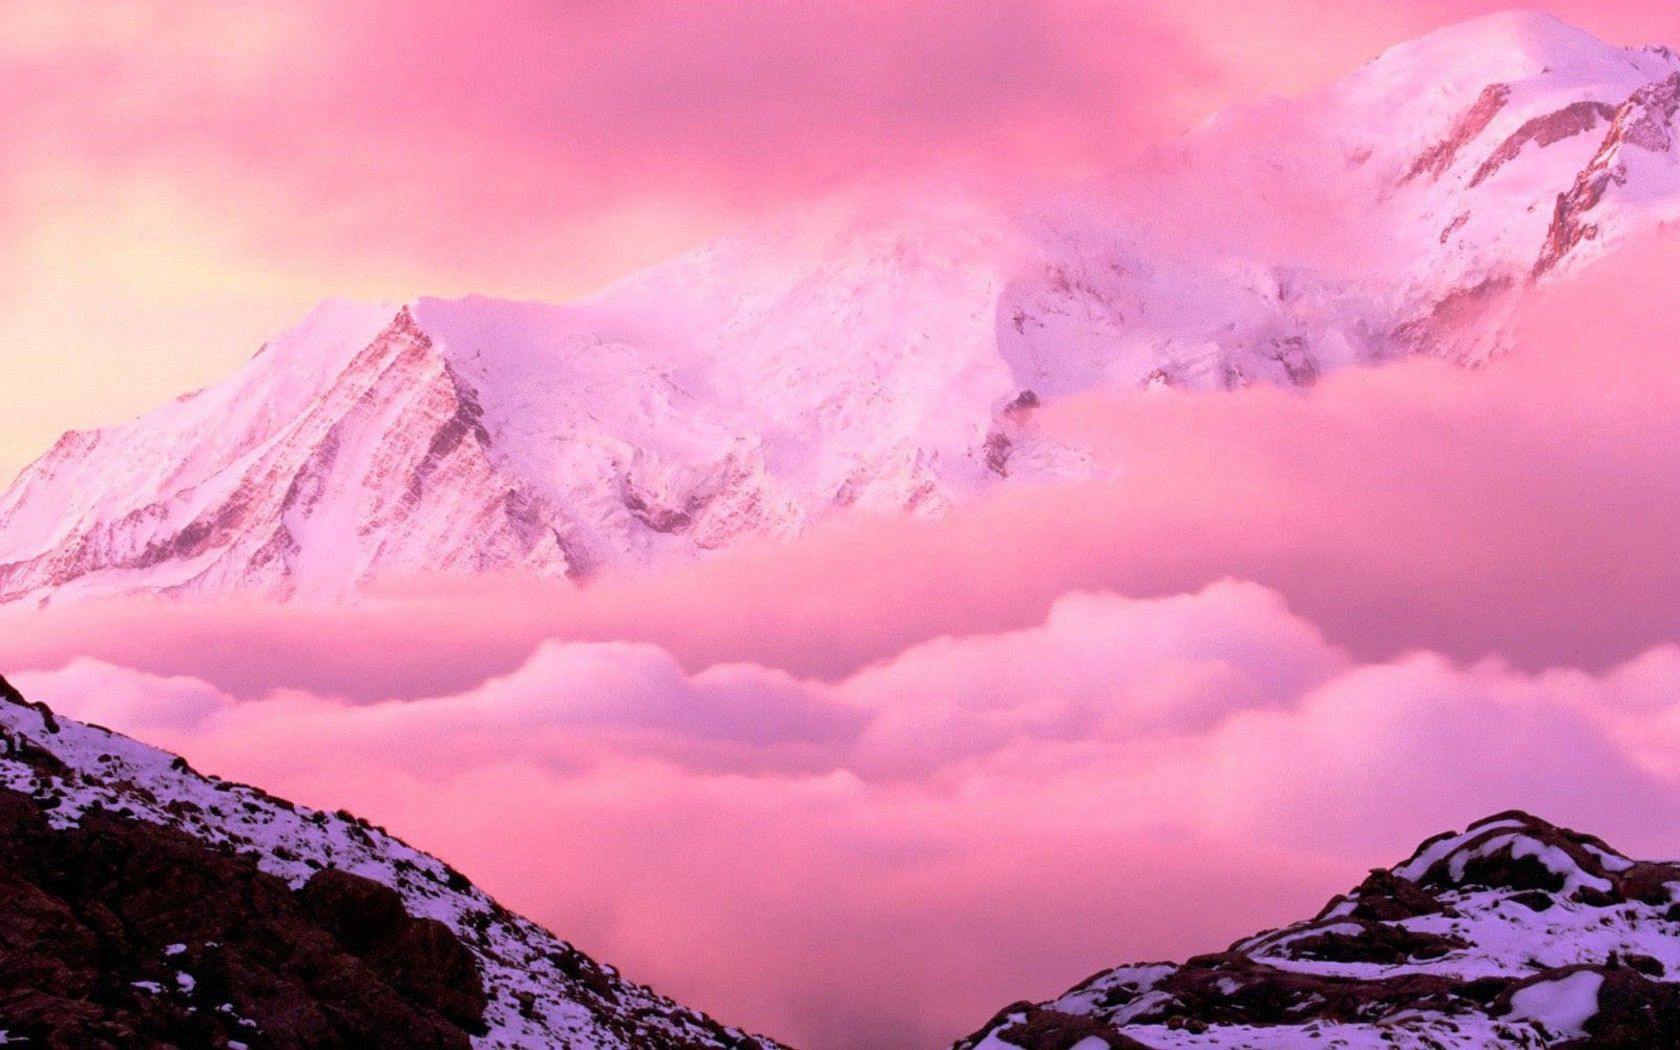 mountain wallpapers clouds pink 4k mountains nature aesthetic landscape amazing desktop background snow abstract purple palette alliswall wall tags recently